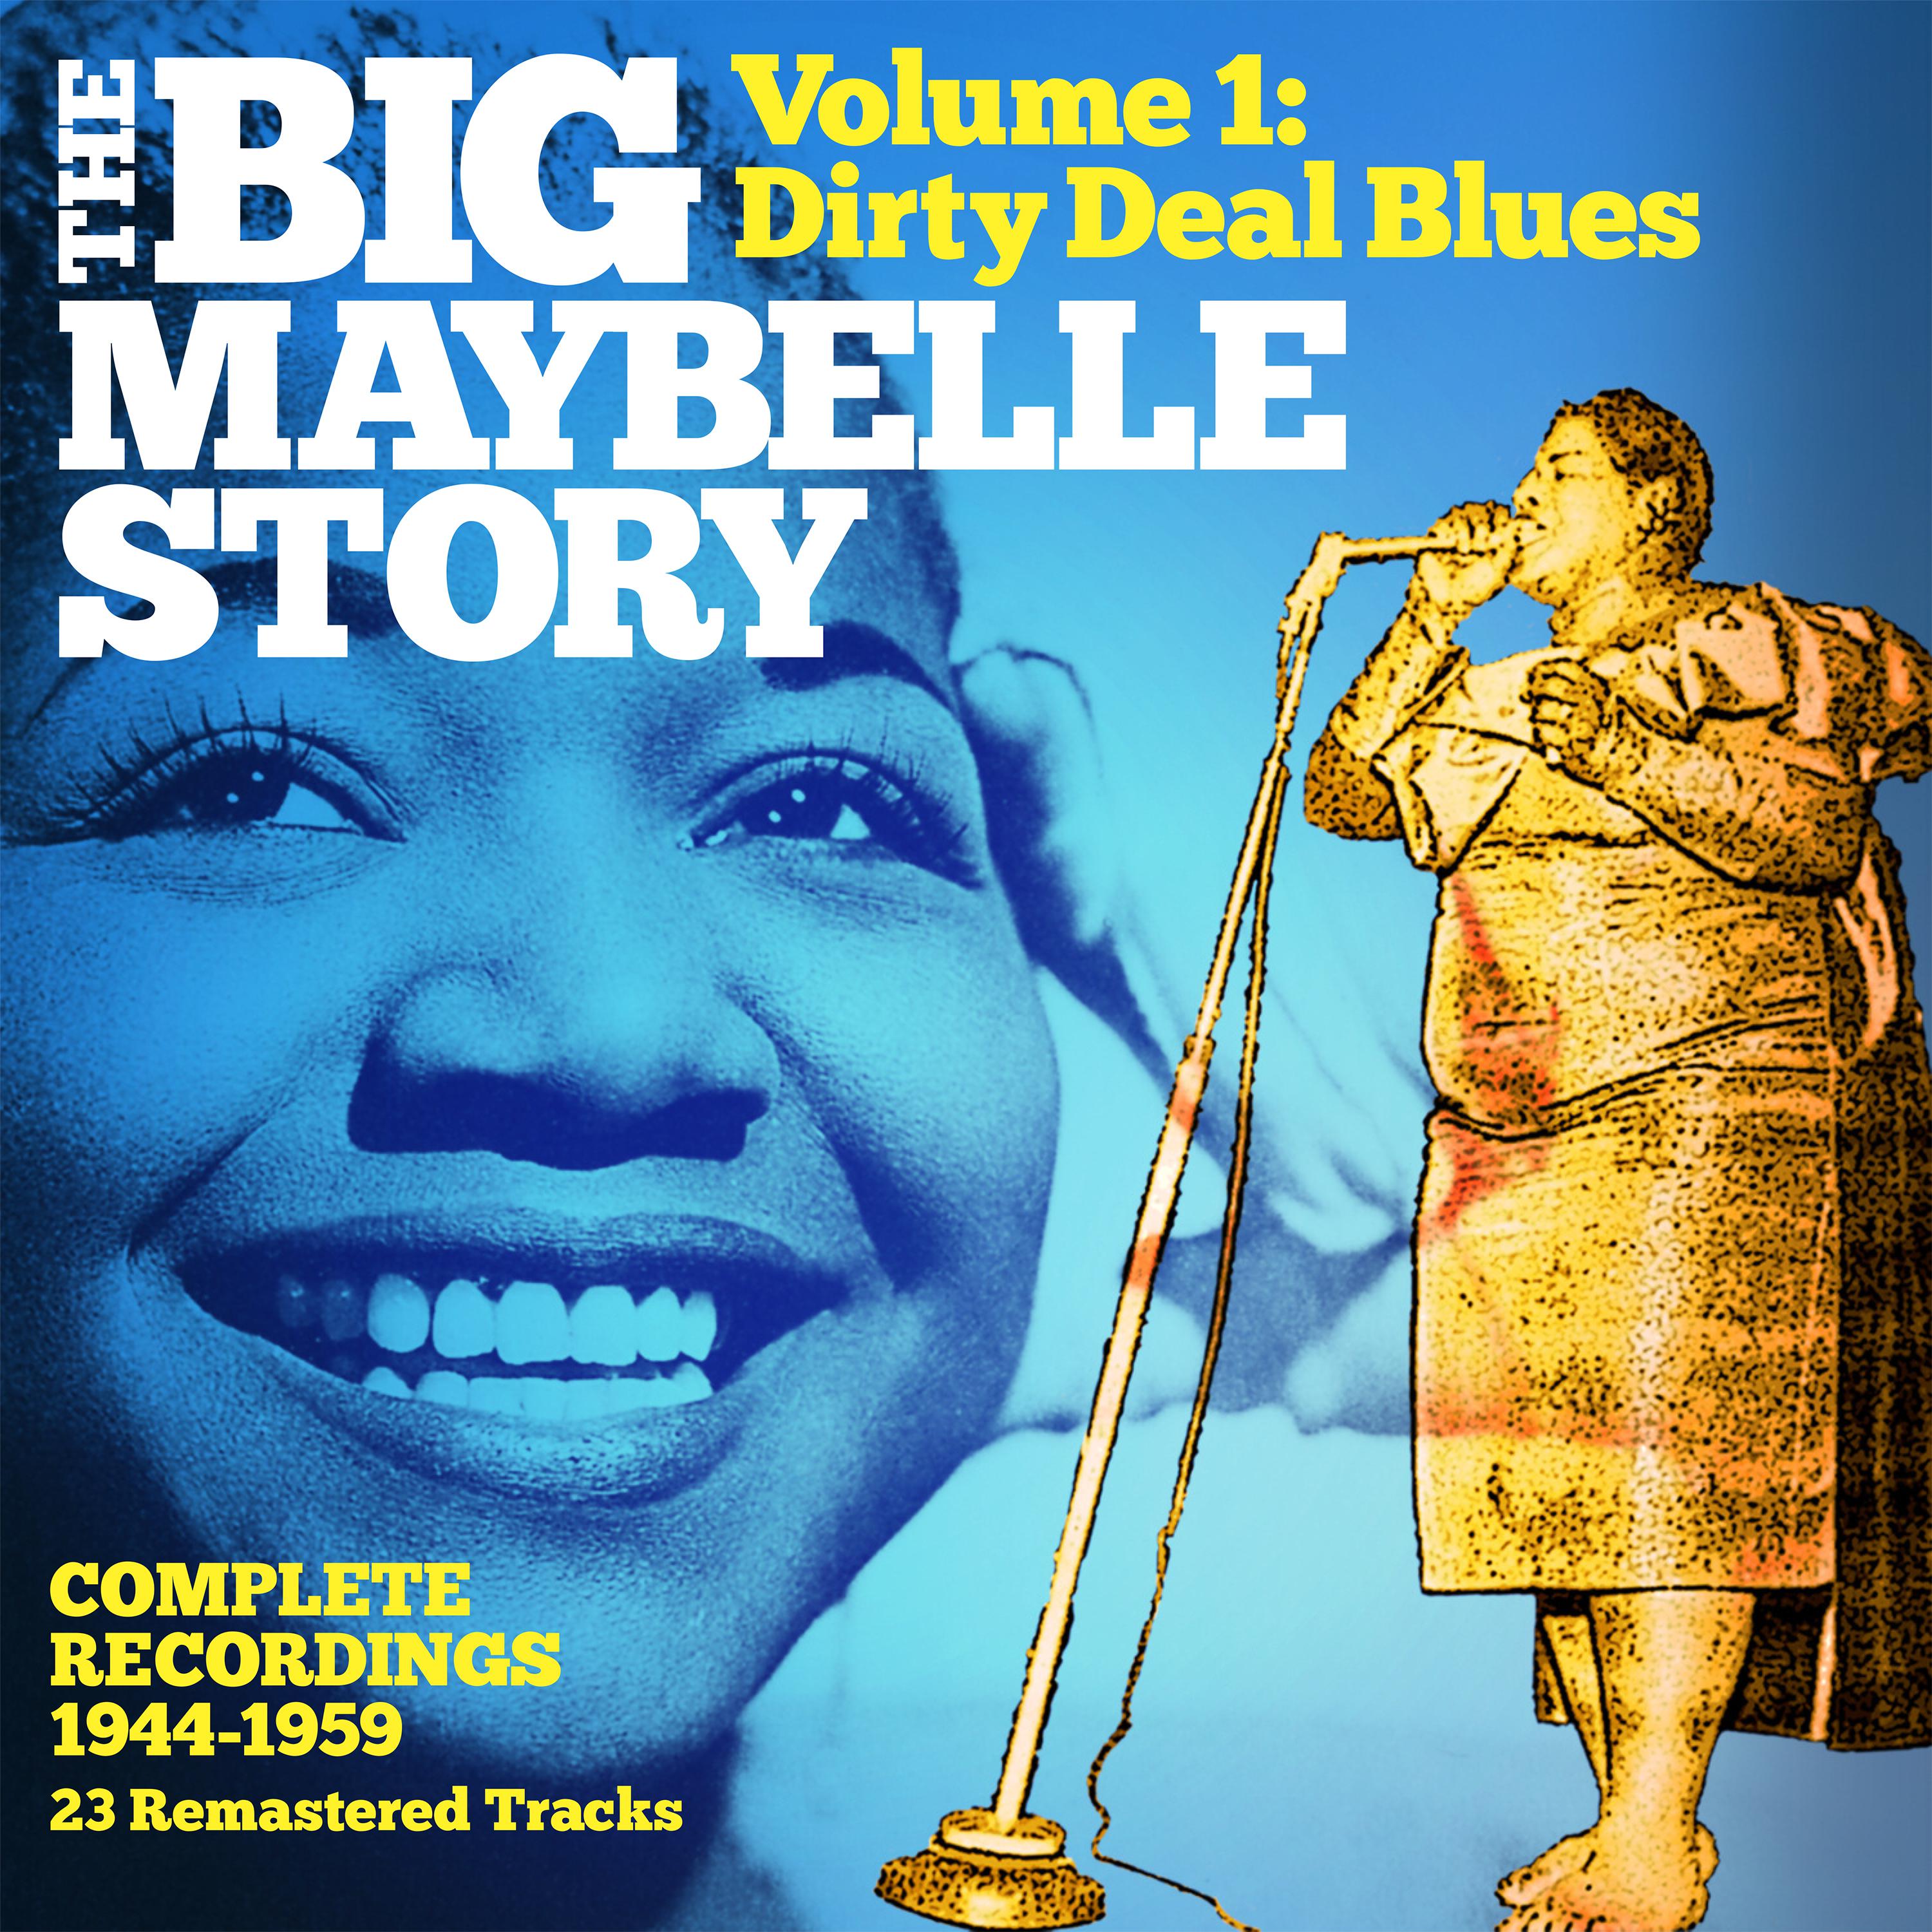 Big Maybelle - Way Back Home (feat. Leroy Kirkland Orchestra)